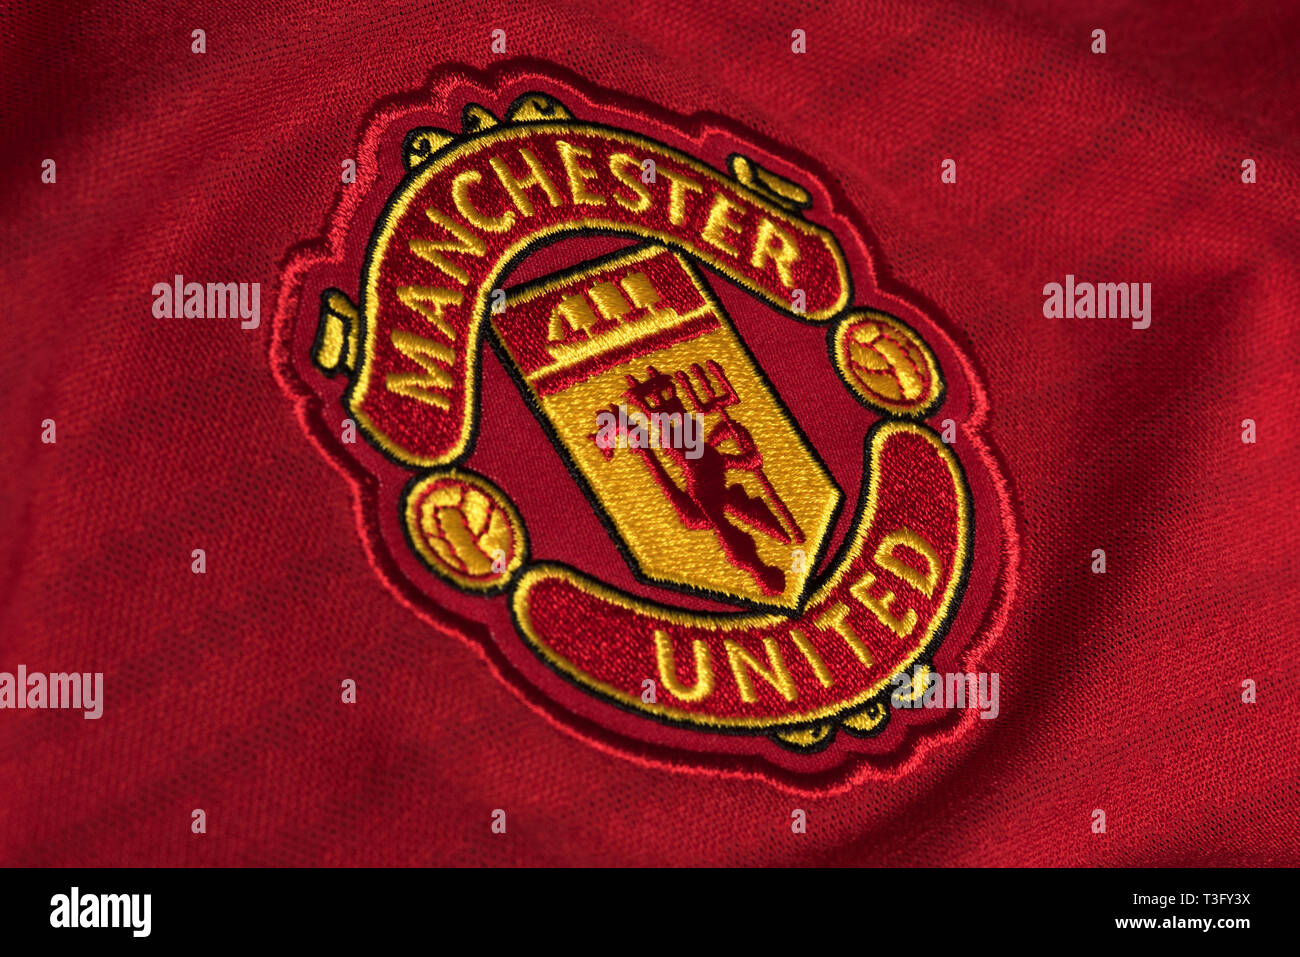 Man Utd Logo High Resolution Stock Photography And Images Alamy